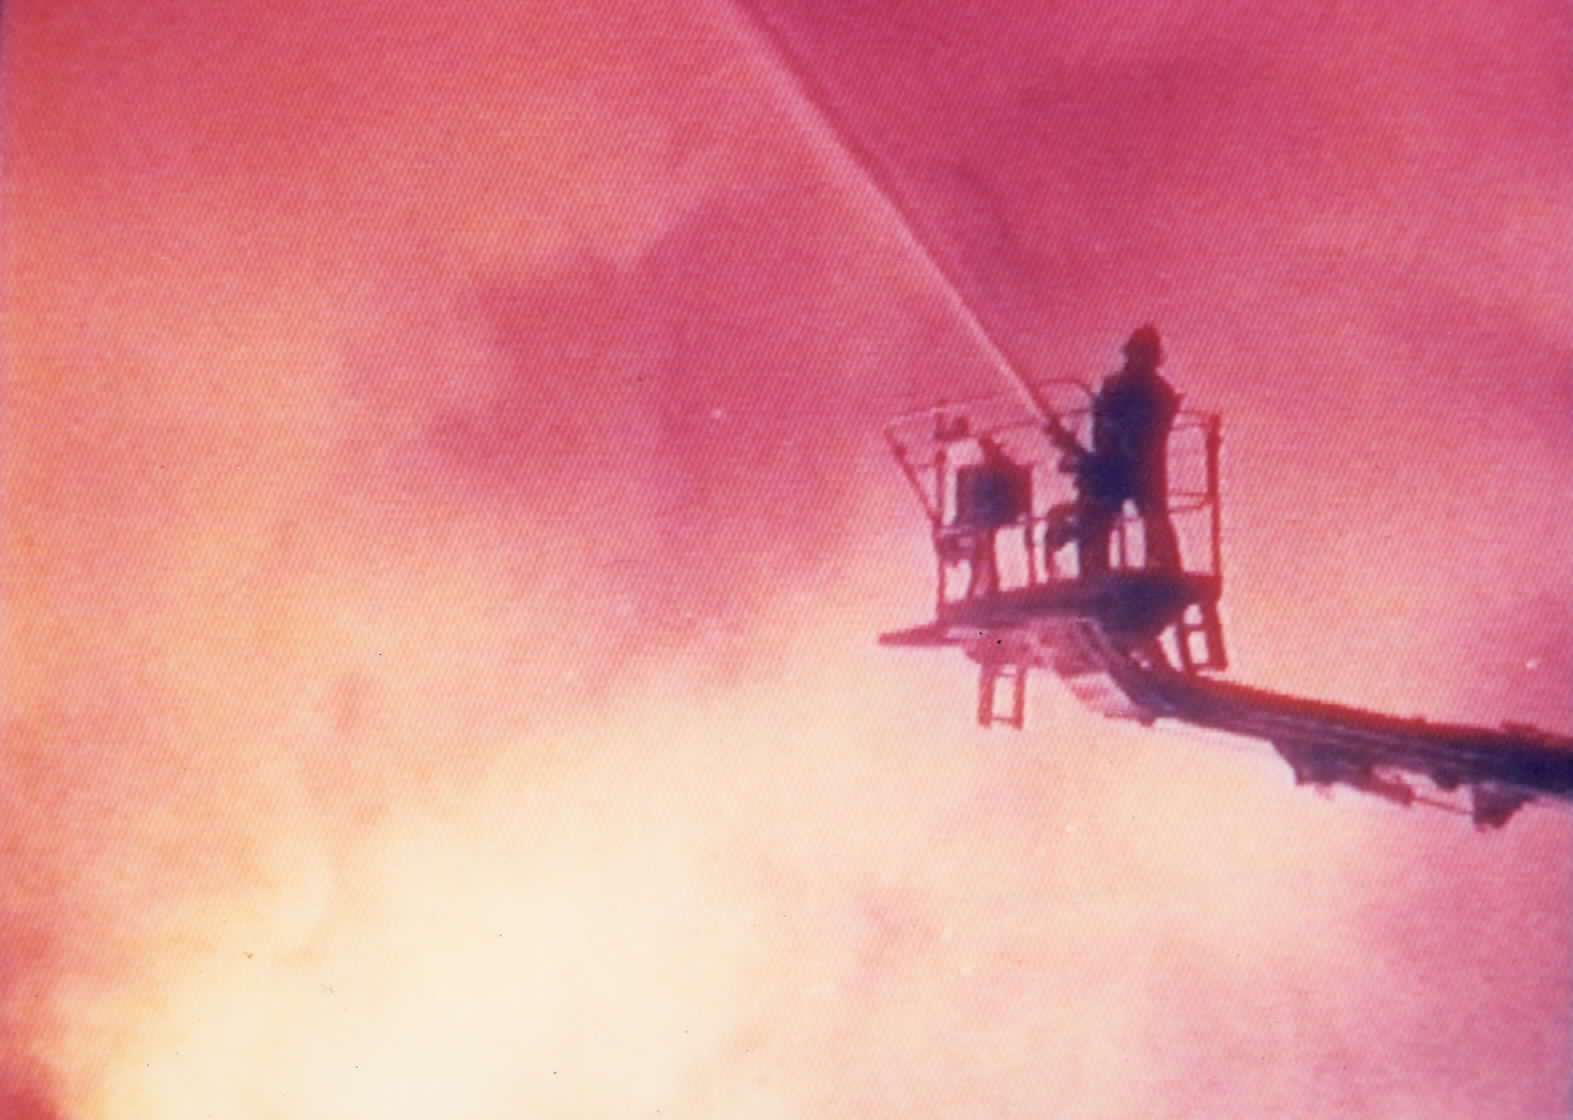 Firefighters battle the blaze at Tesco in Grove Green, 1993